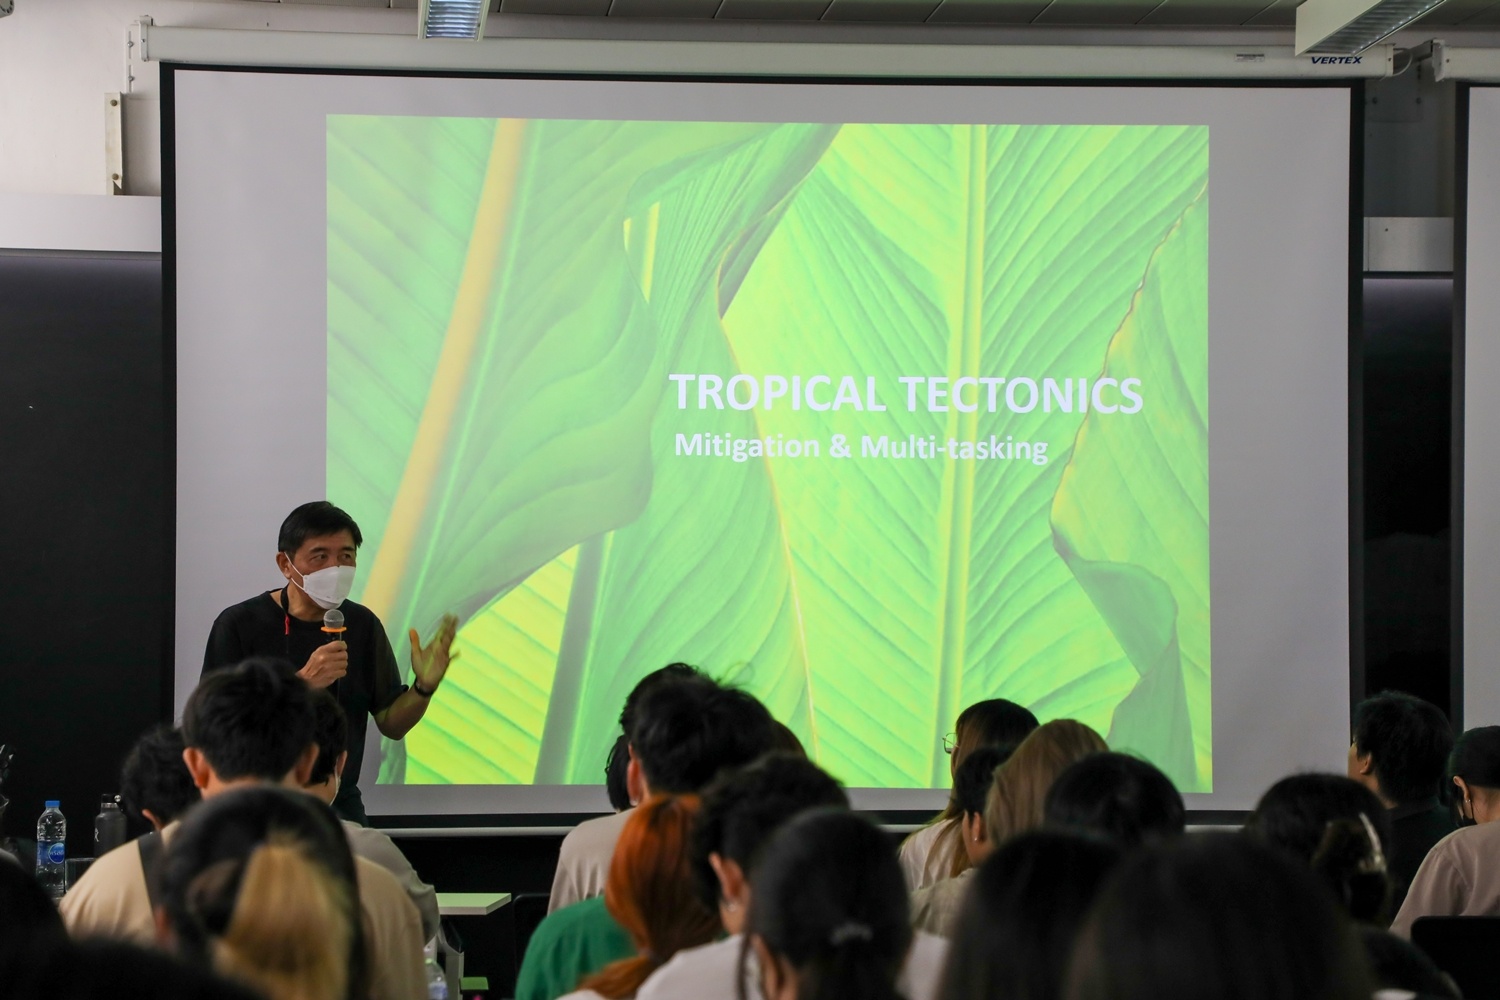 Public Lecture: Tropical Tections  Mitigation & Multi-tasking